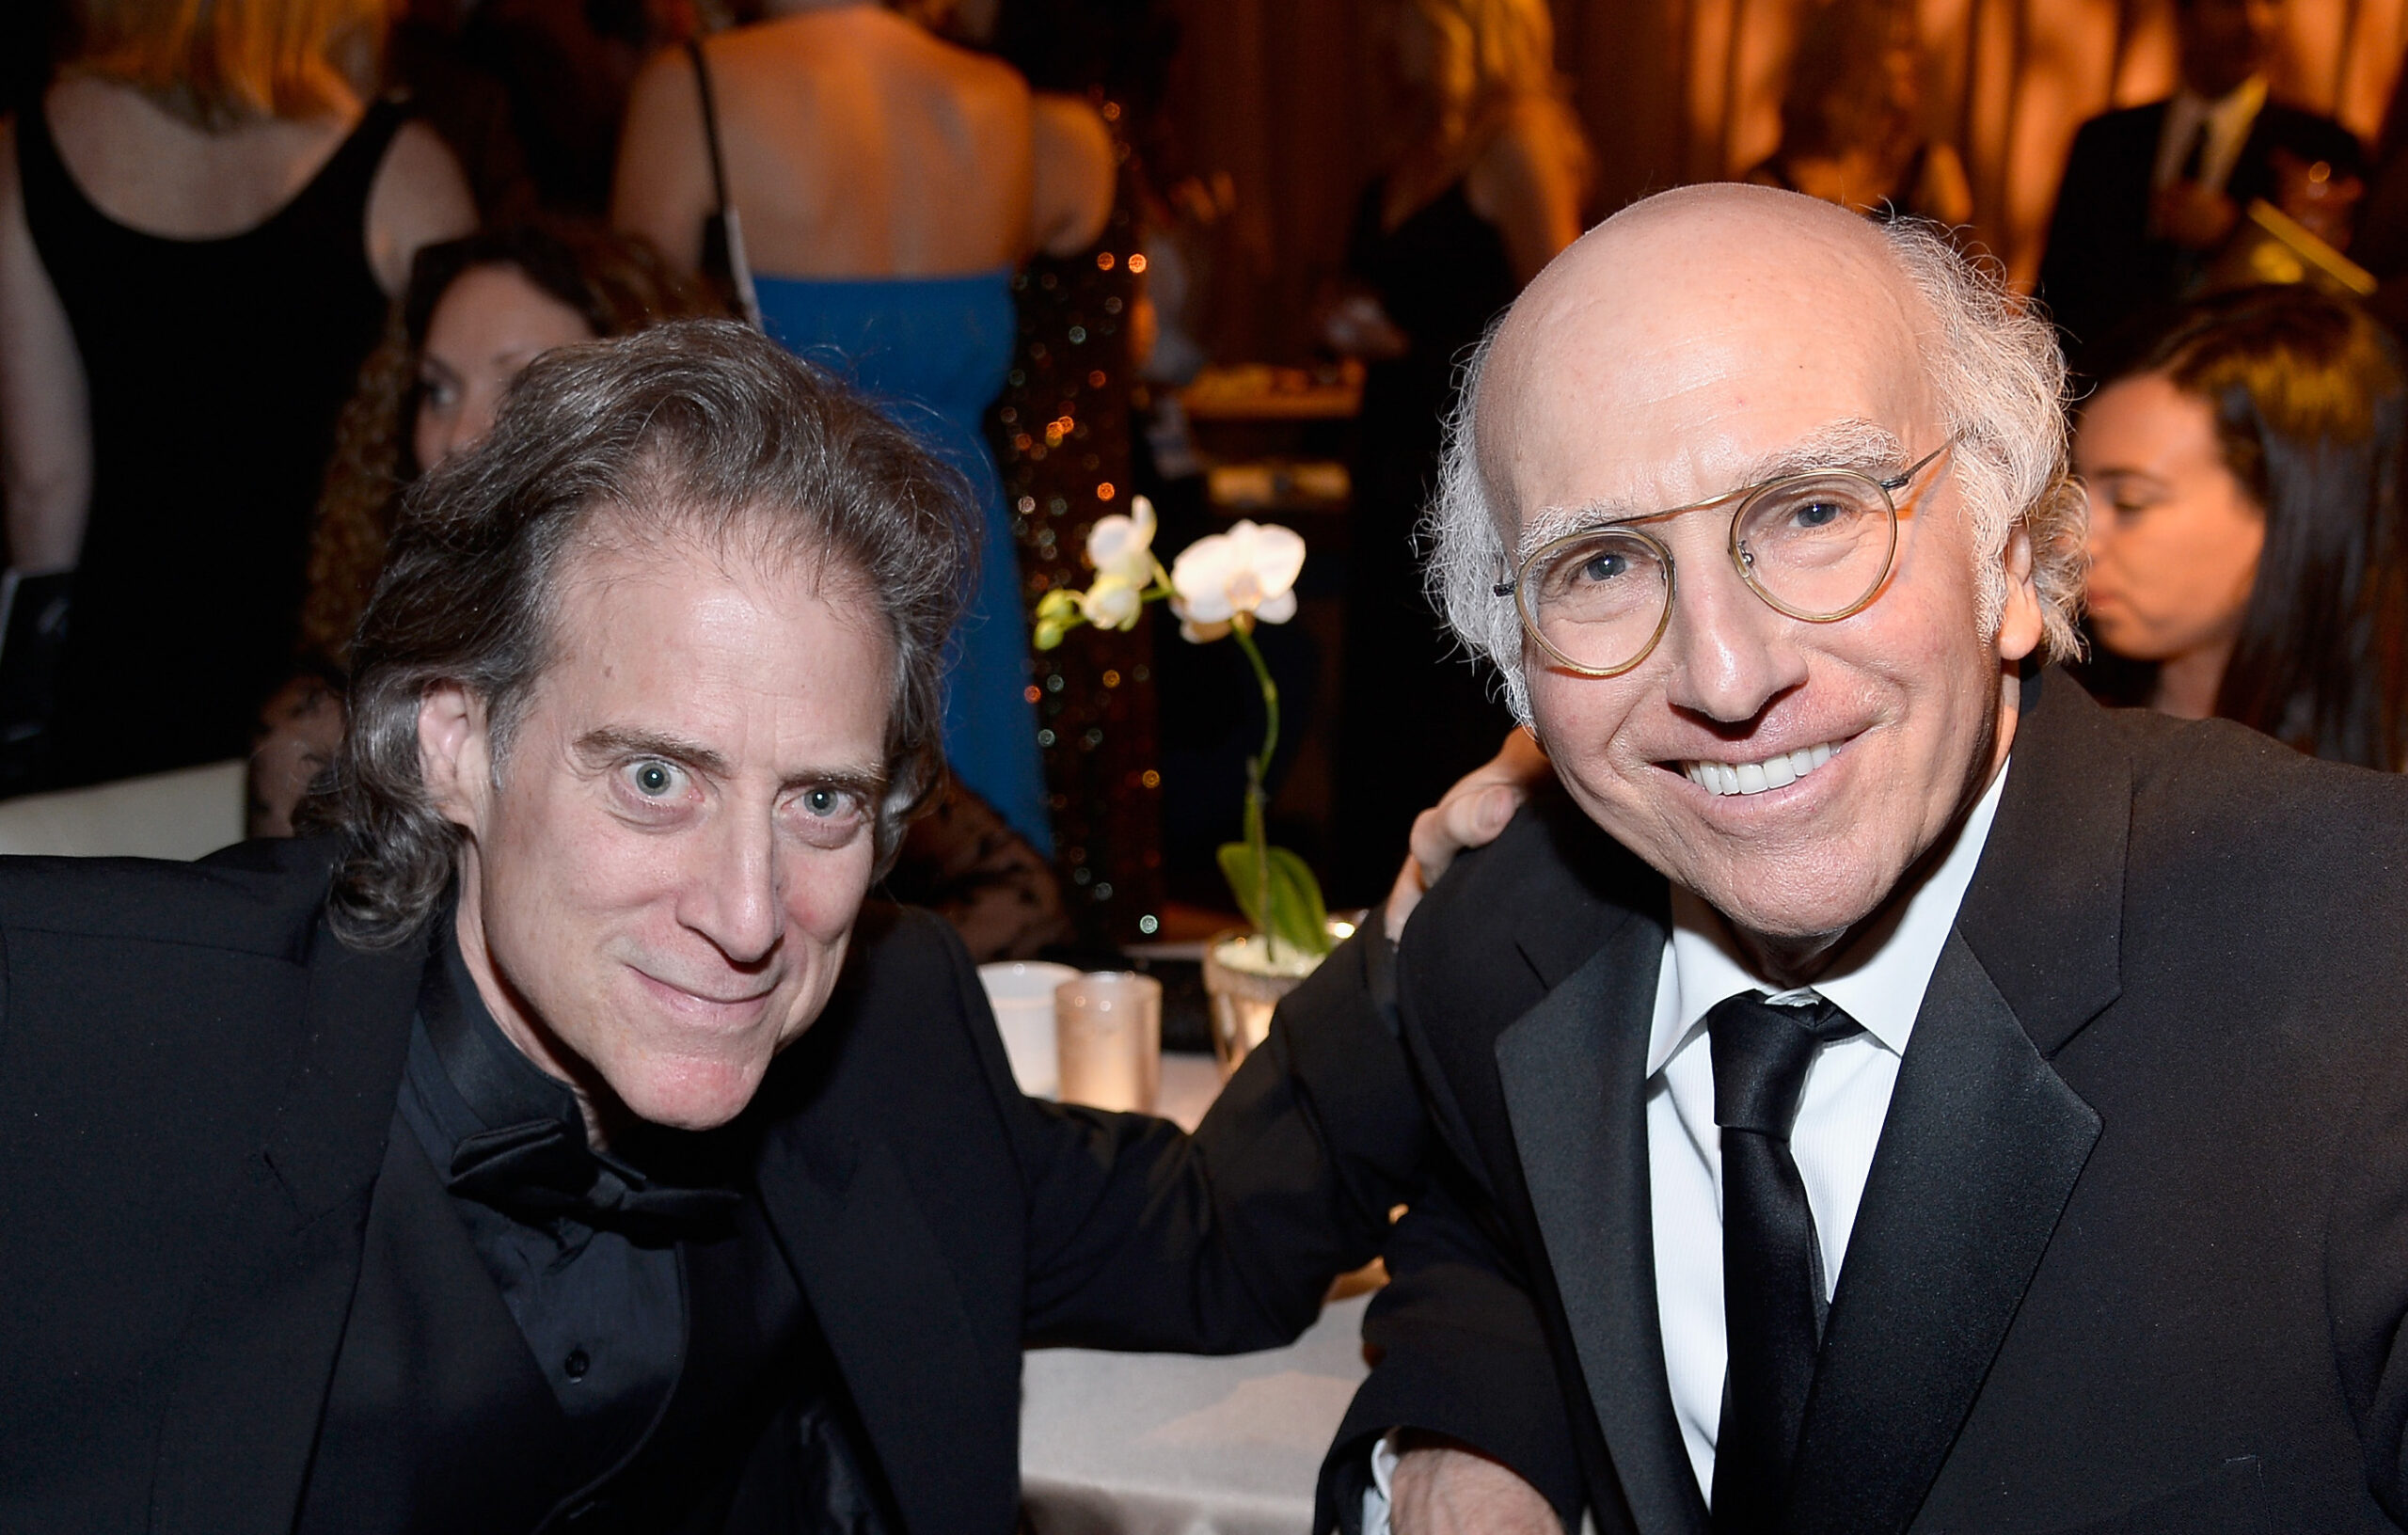 Larry David mourns the loss of Richard Lewis, describing him as a beloved brother